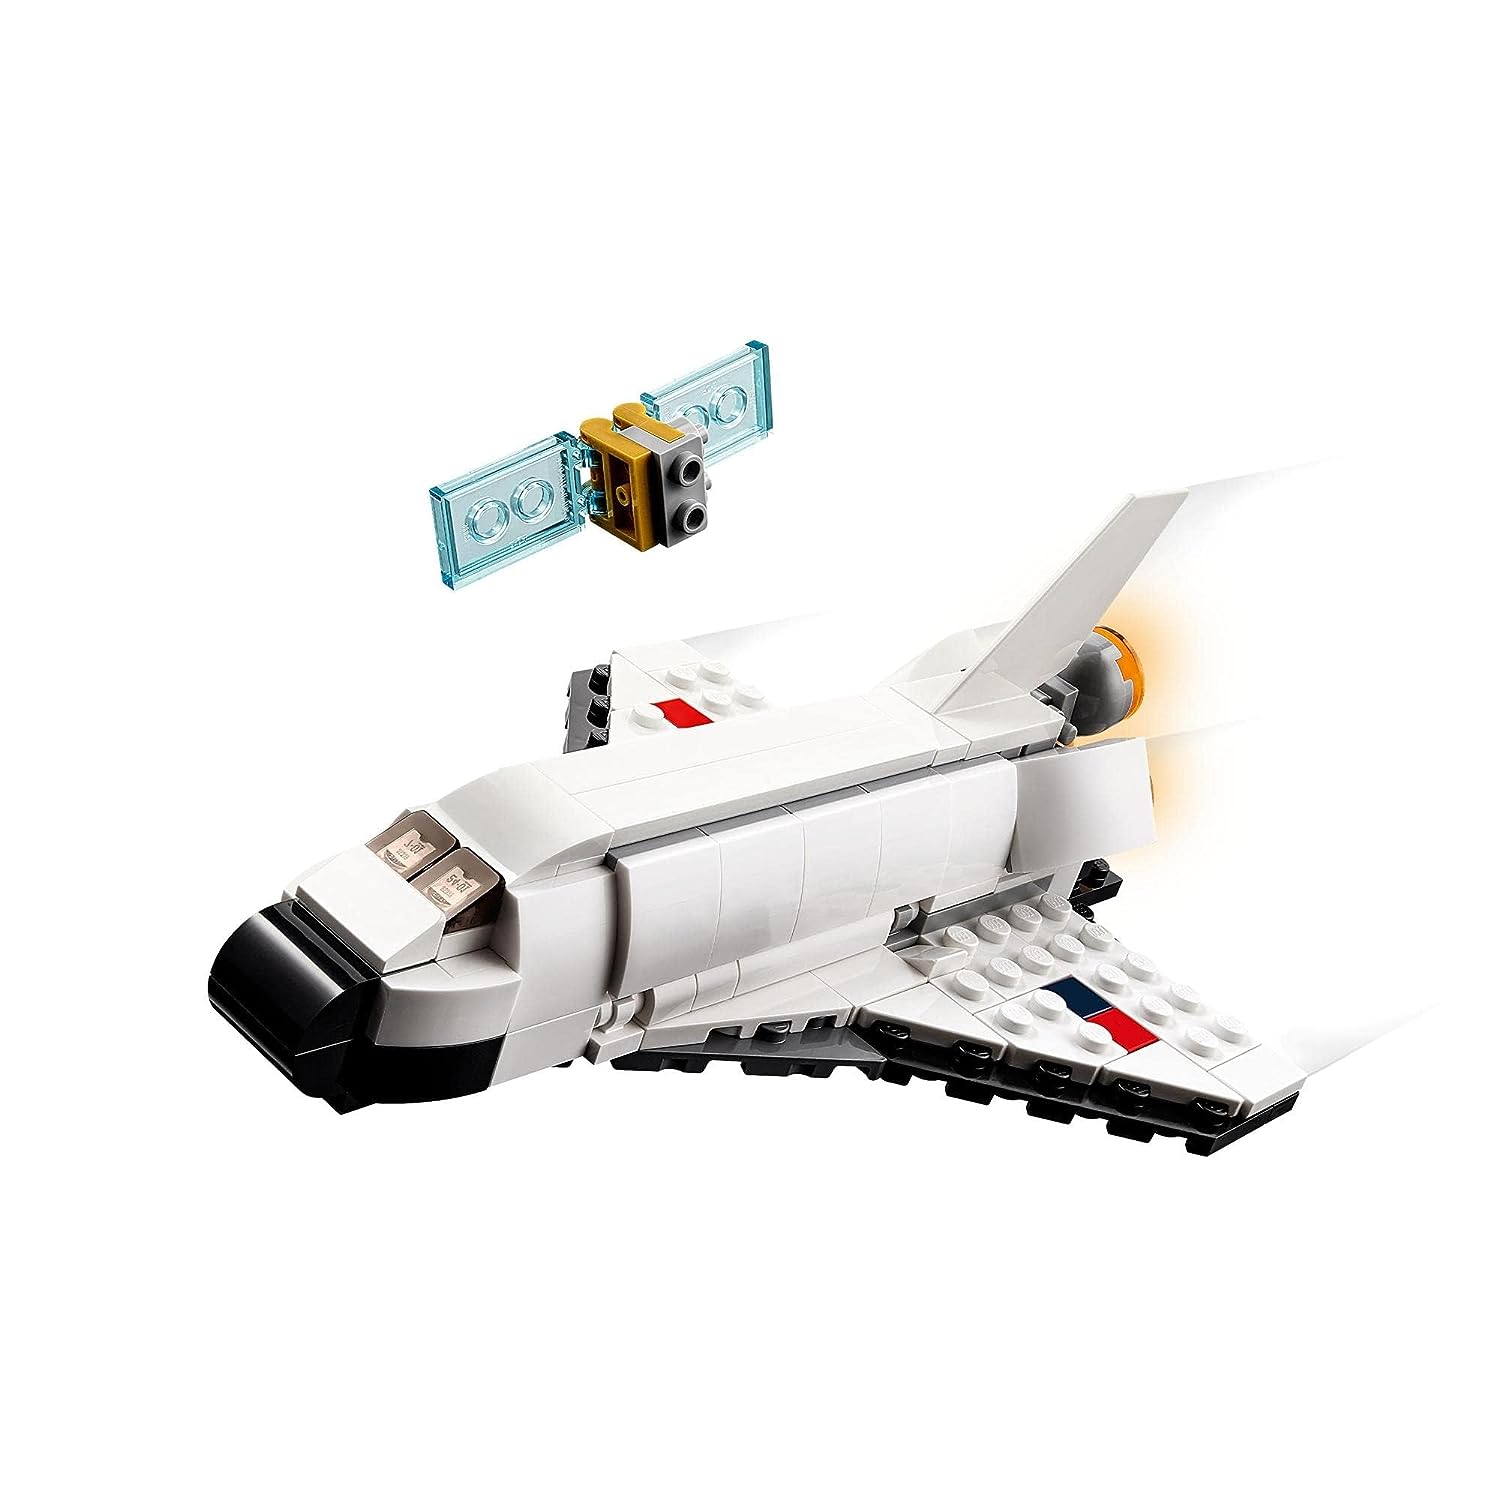 LEGO Creator 3In1 Space Shuttle Building Kit for Ages 6+